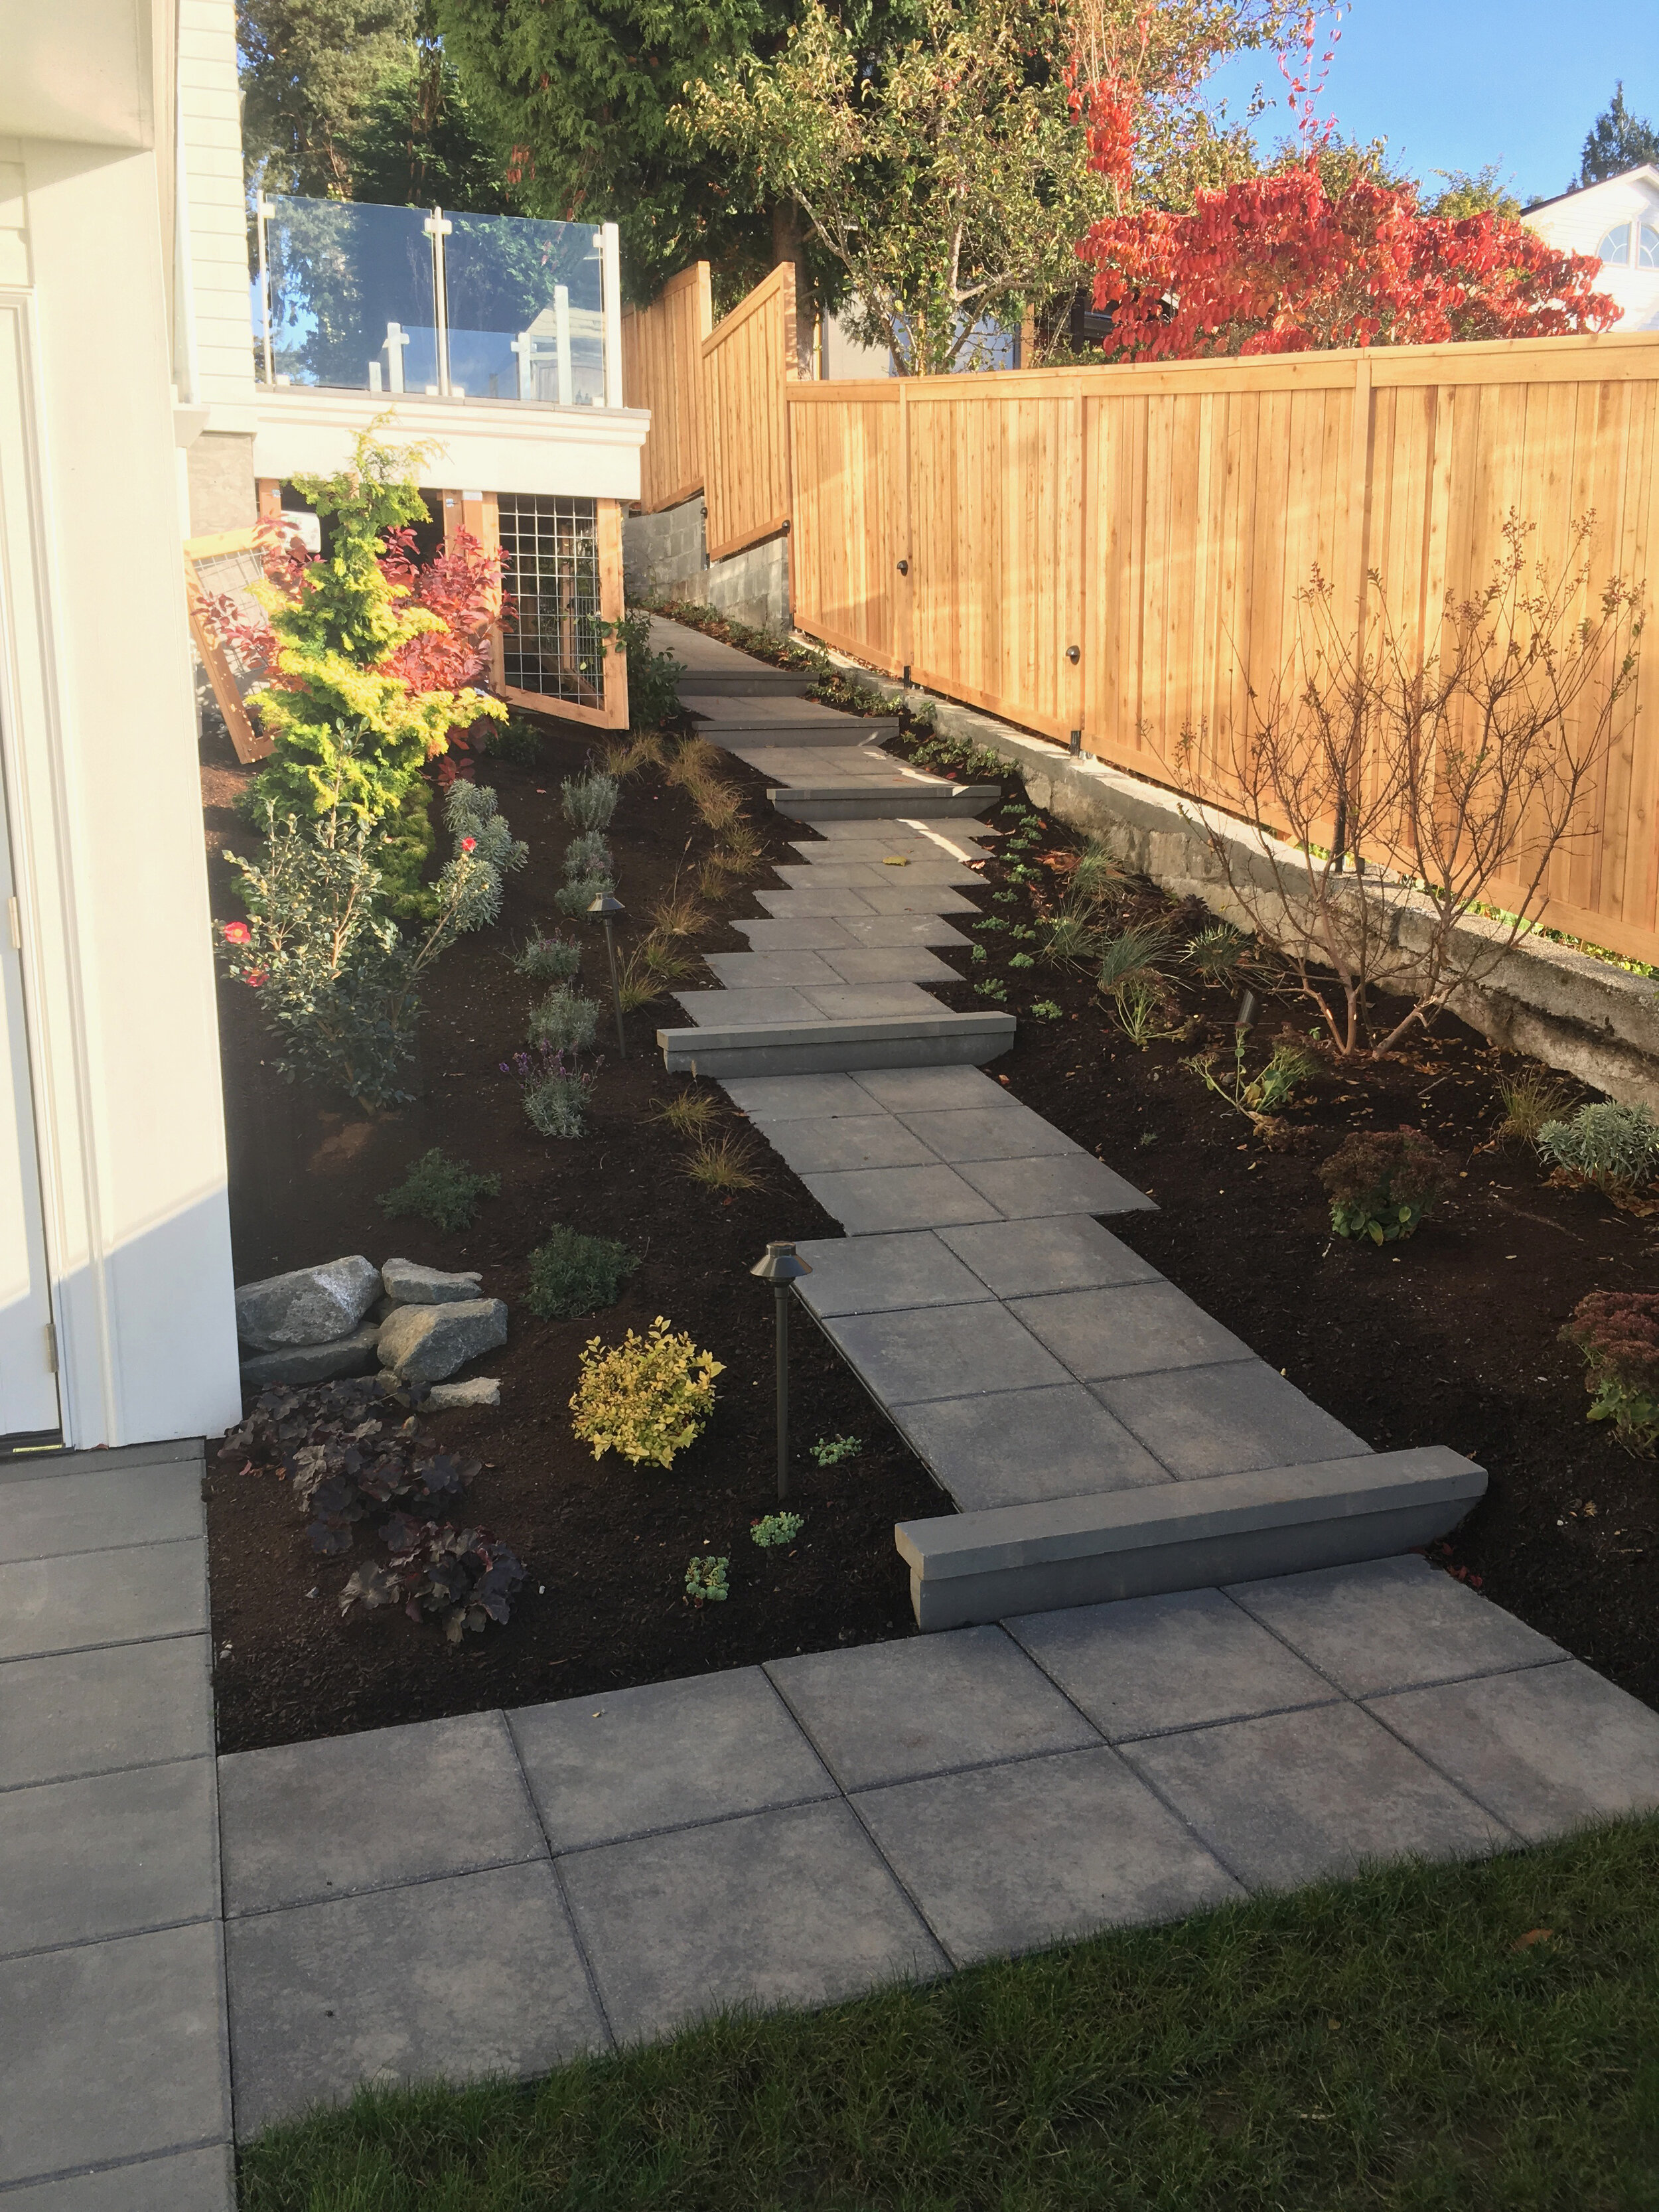 P6: 2' x 2' Architectural Paver Pathway with Stone Risers